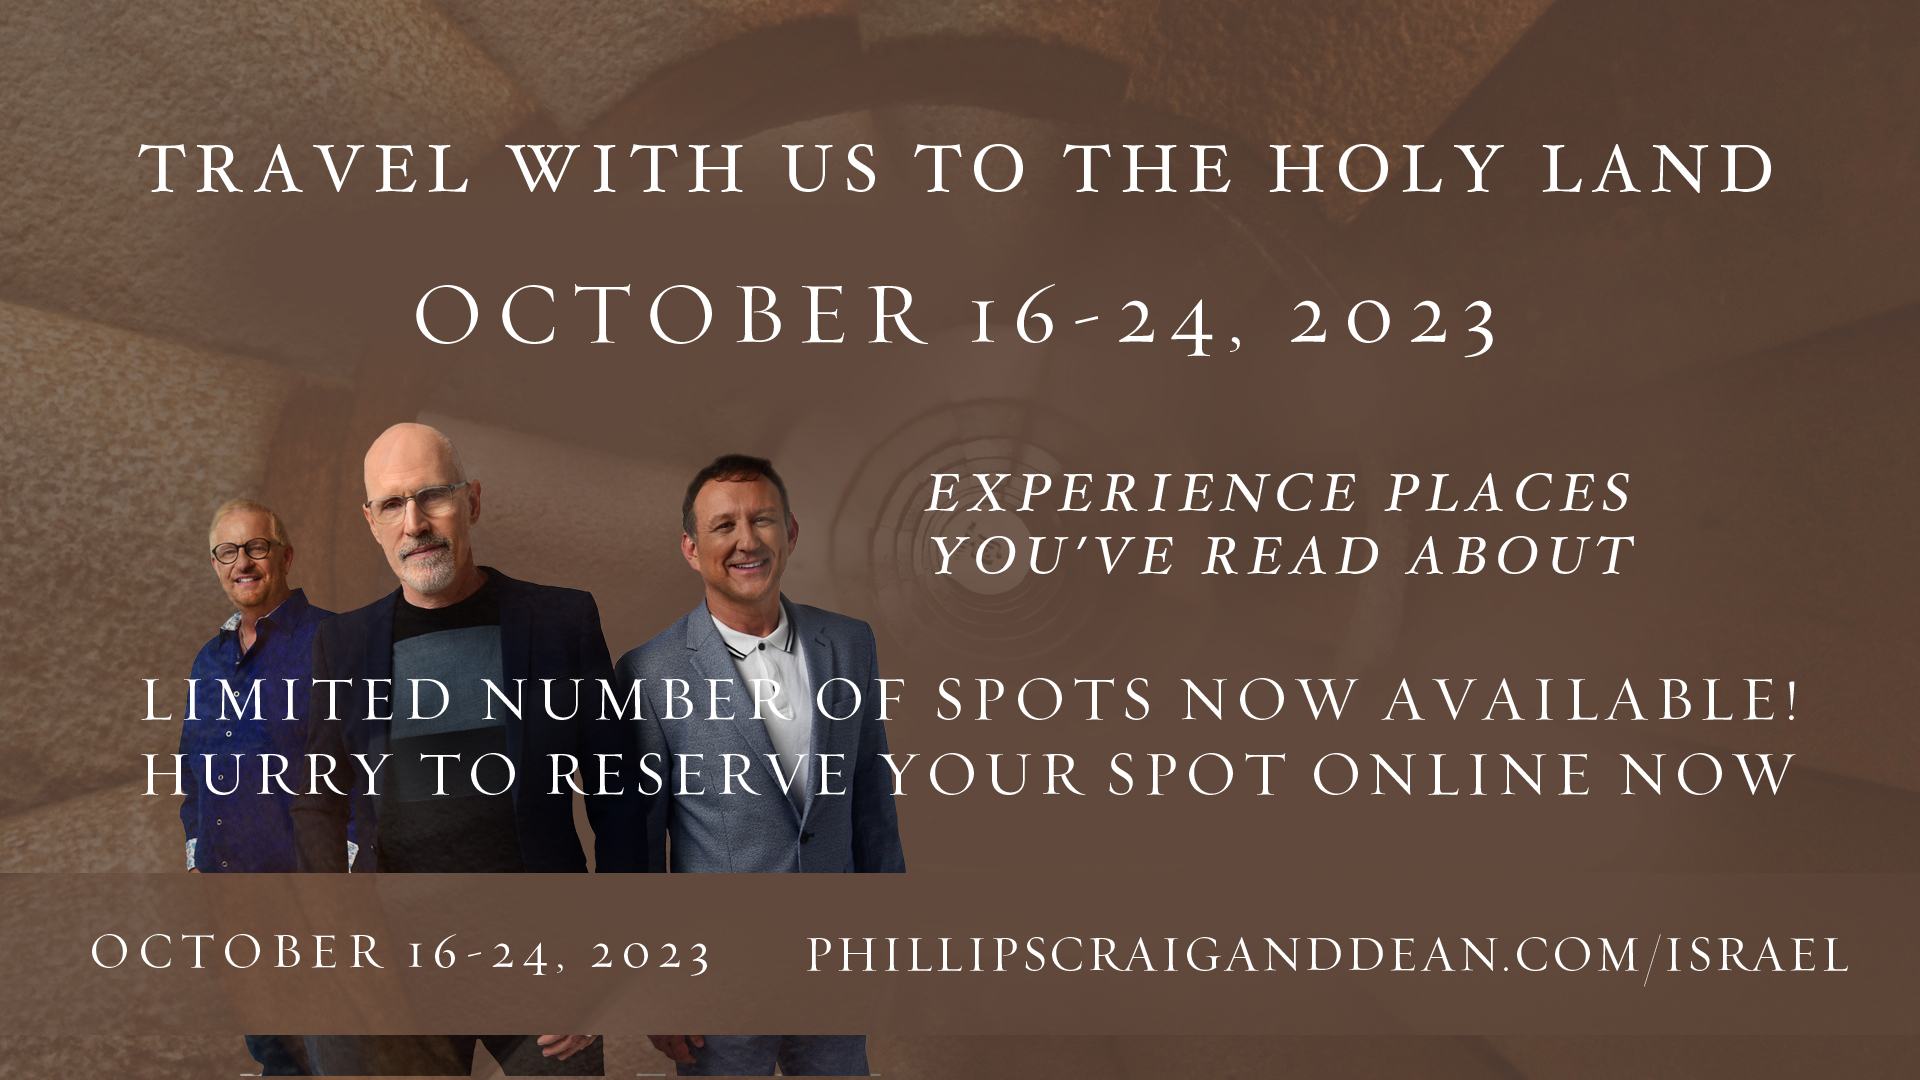 LIMITED NUMBER OF SPOTS ARE NOW AVAILABLE! Join Phillips, Craig & Dean